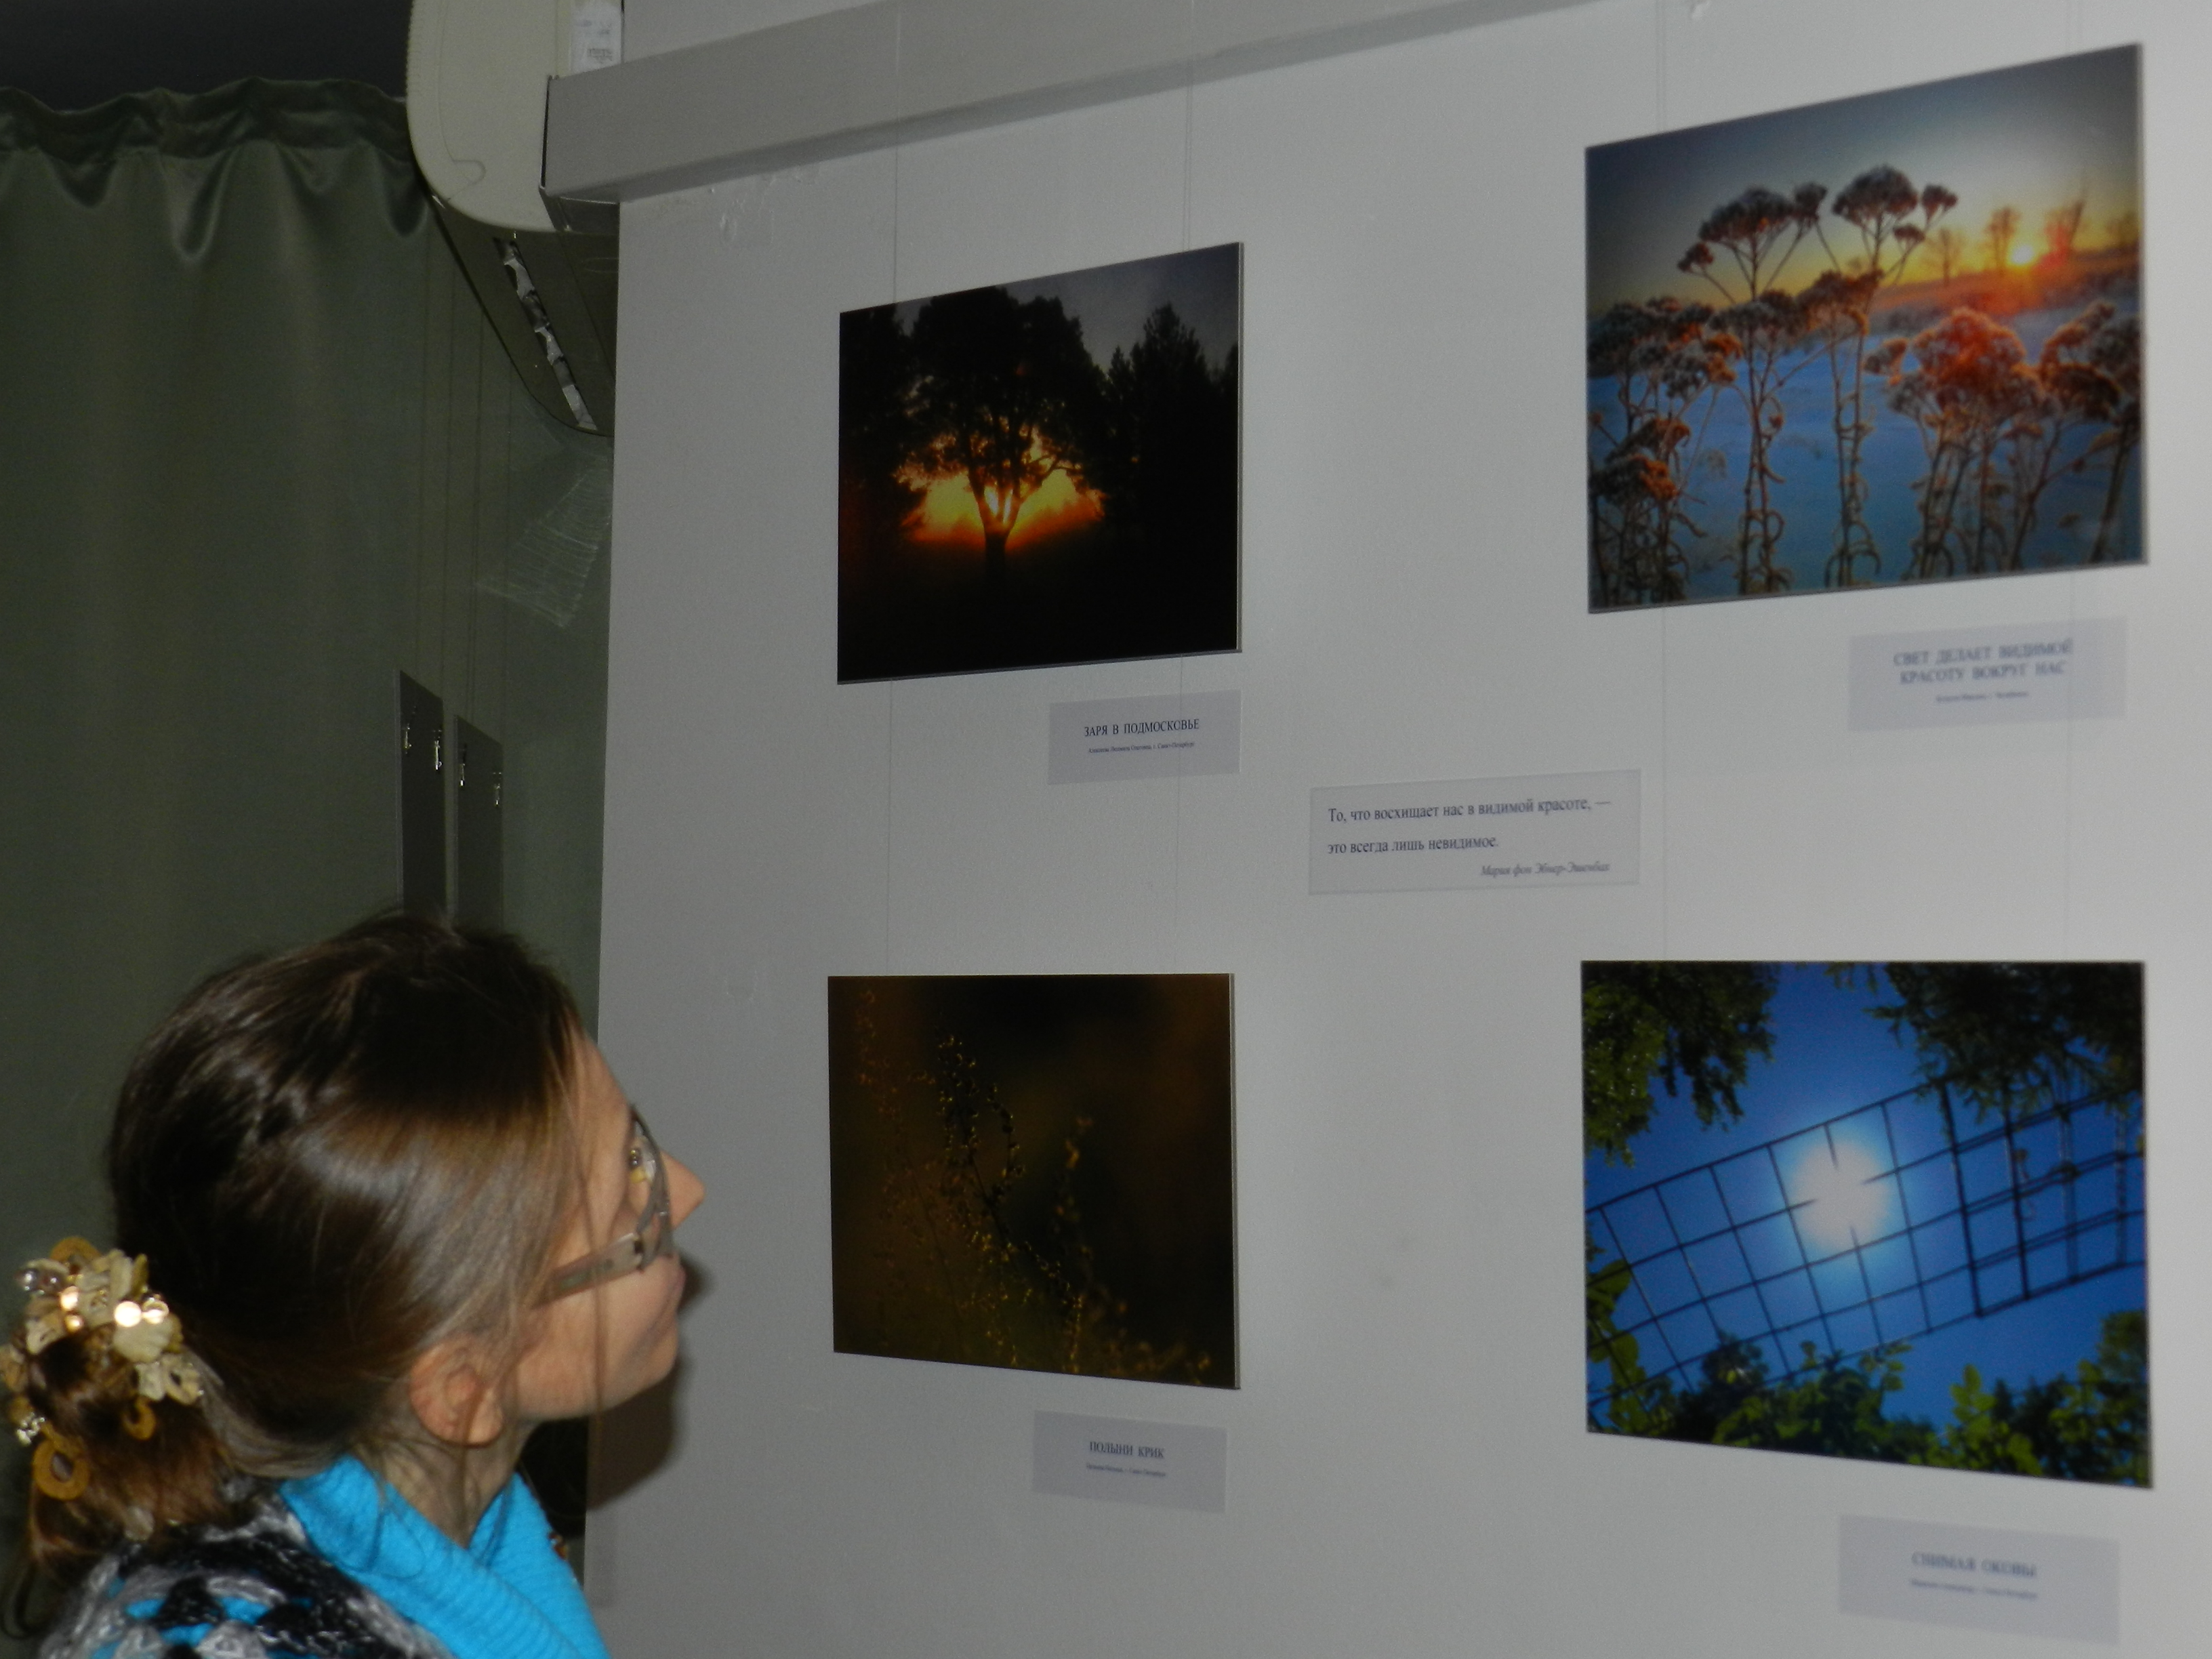 Photo exhibition "Light" in St. Petersbourg